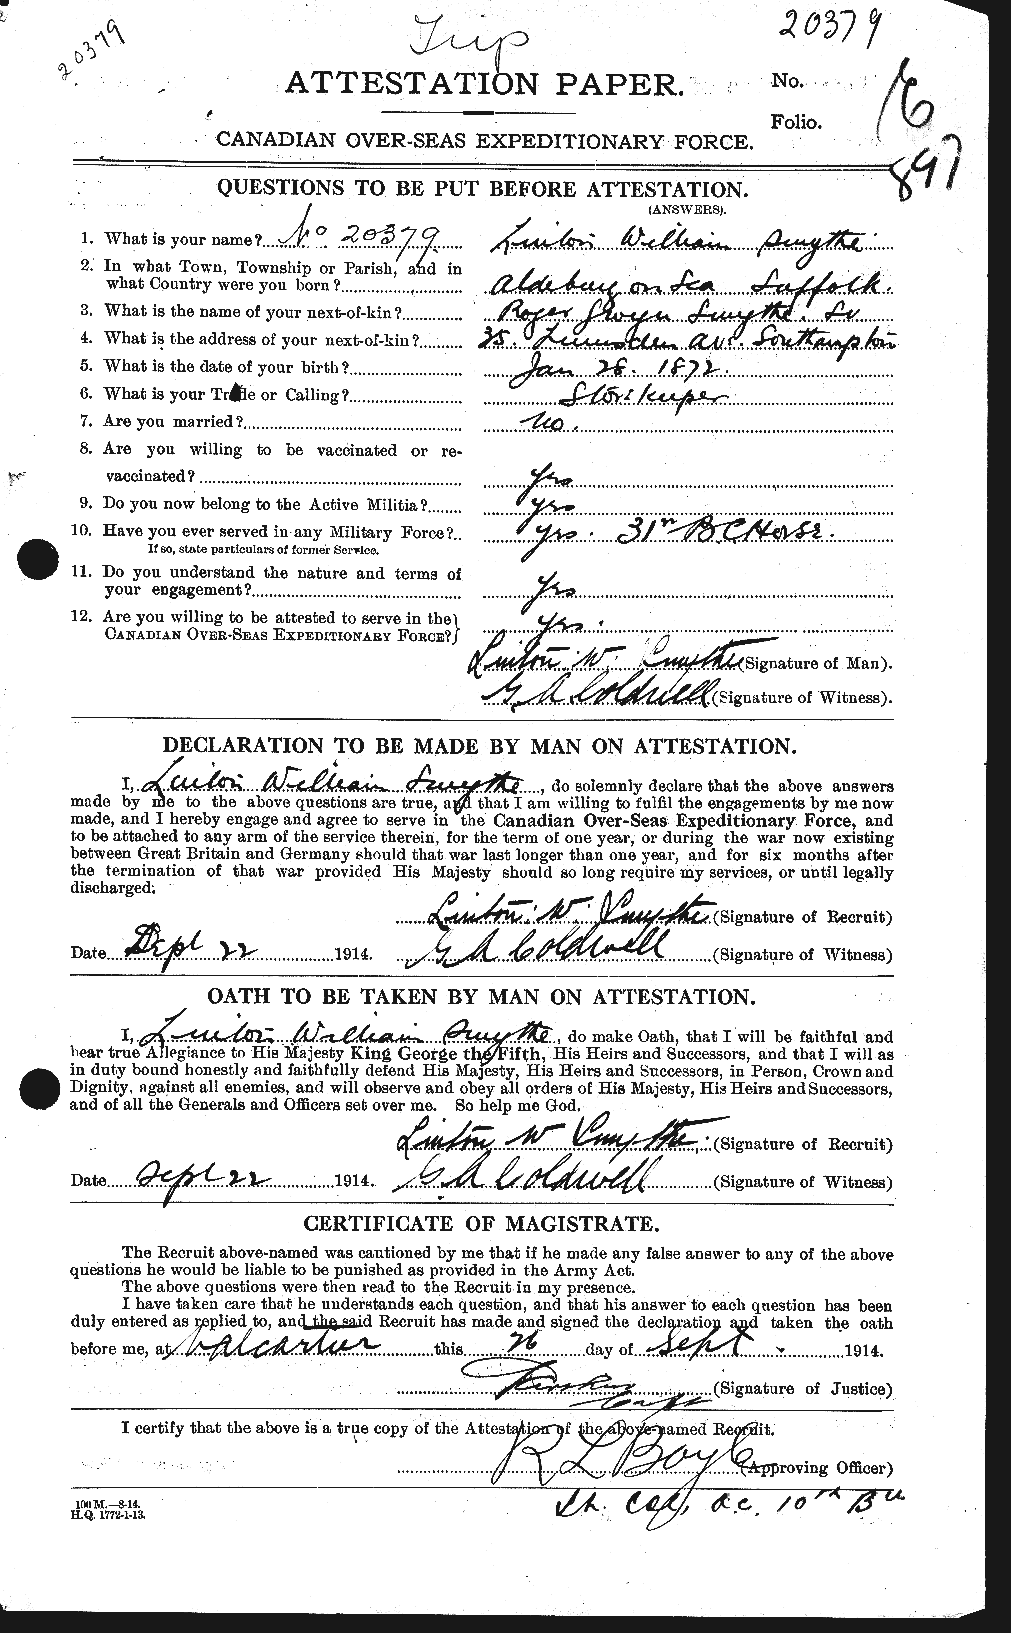 Personnel Records of the First World War - CEF 105567a